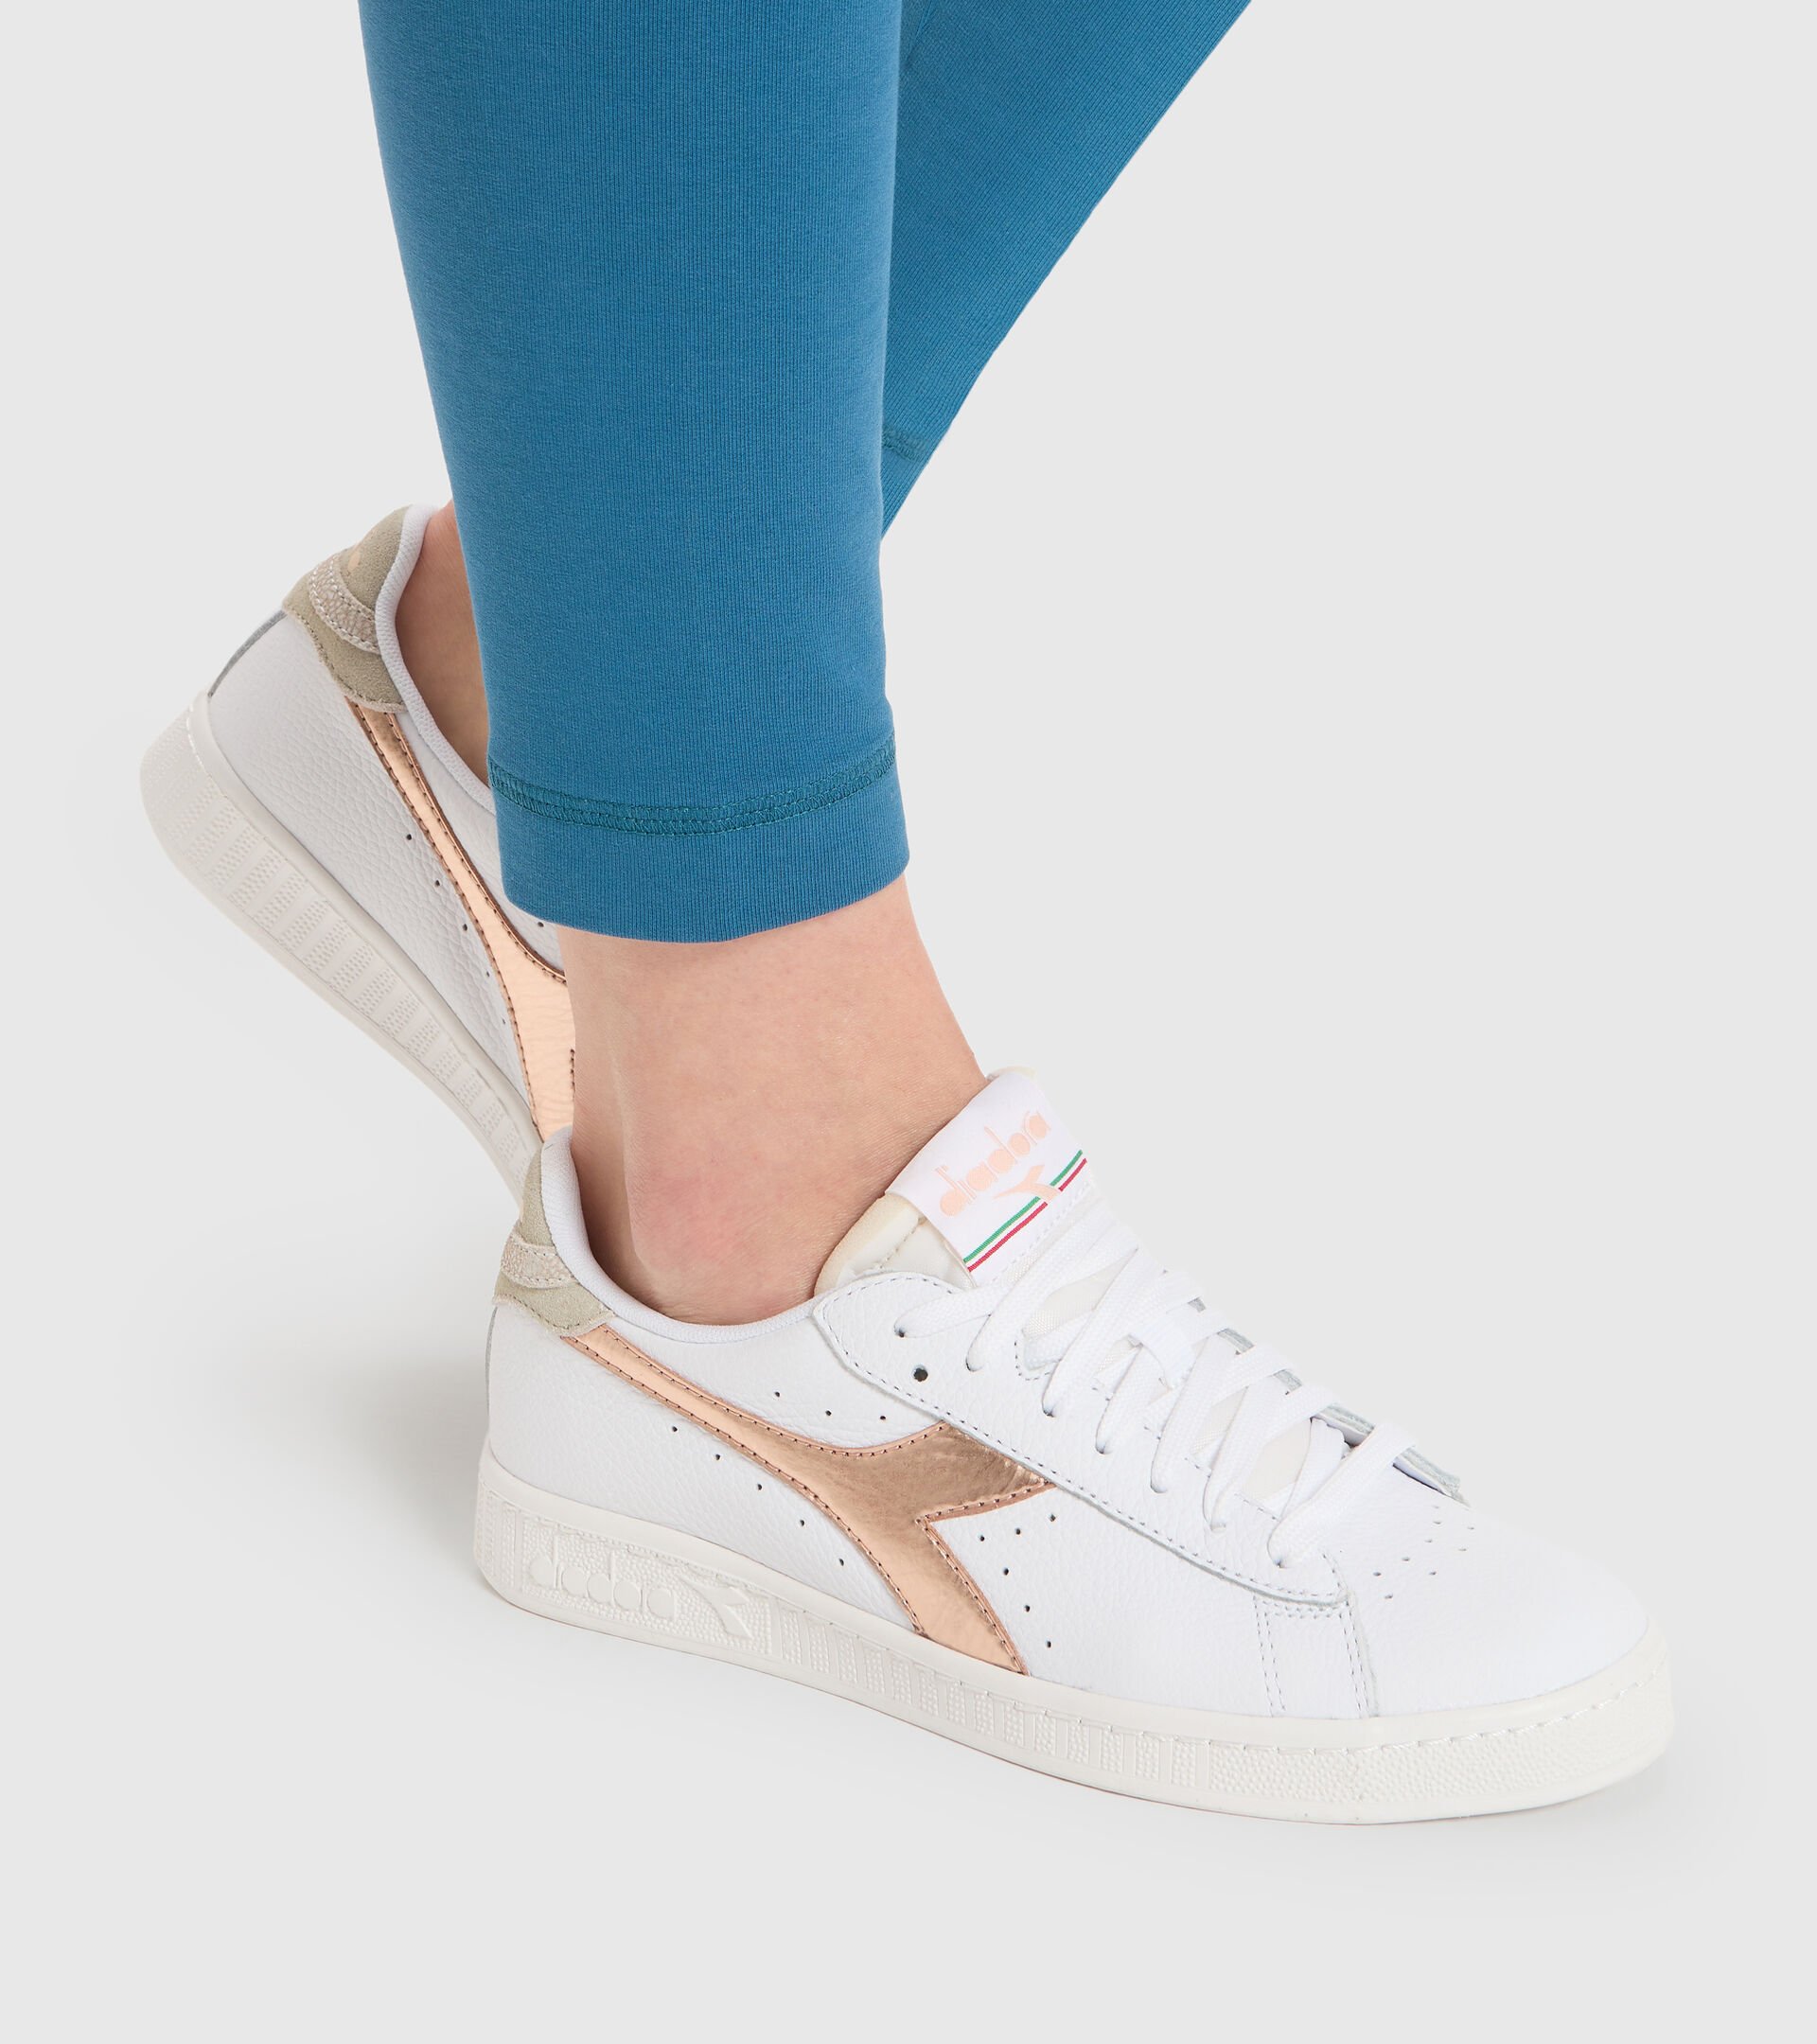 Chaussures de sport - Femme GAME L LOW ICONA GLOSSY WN BLANC/CUIVRE - Diadora